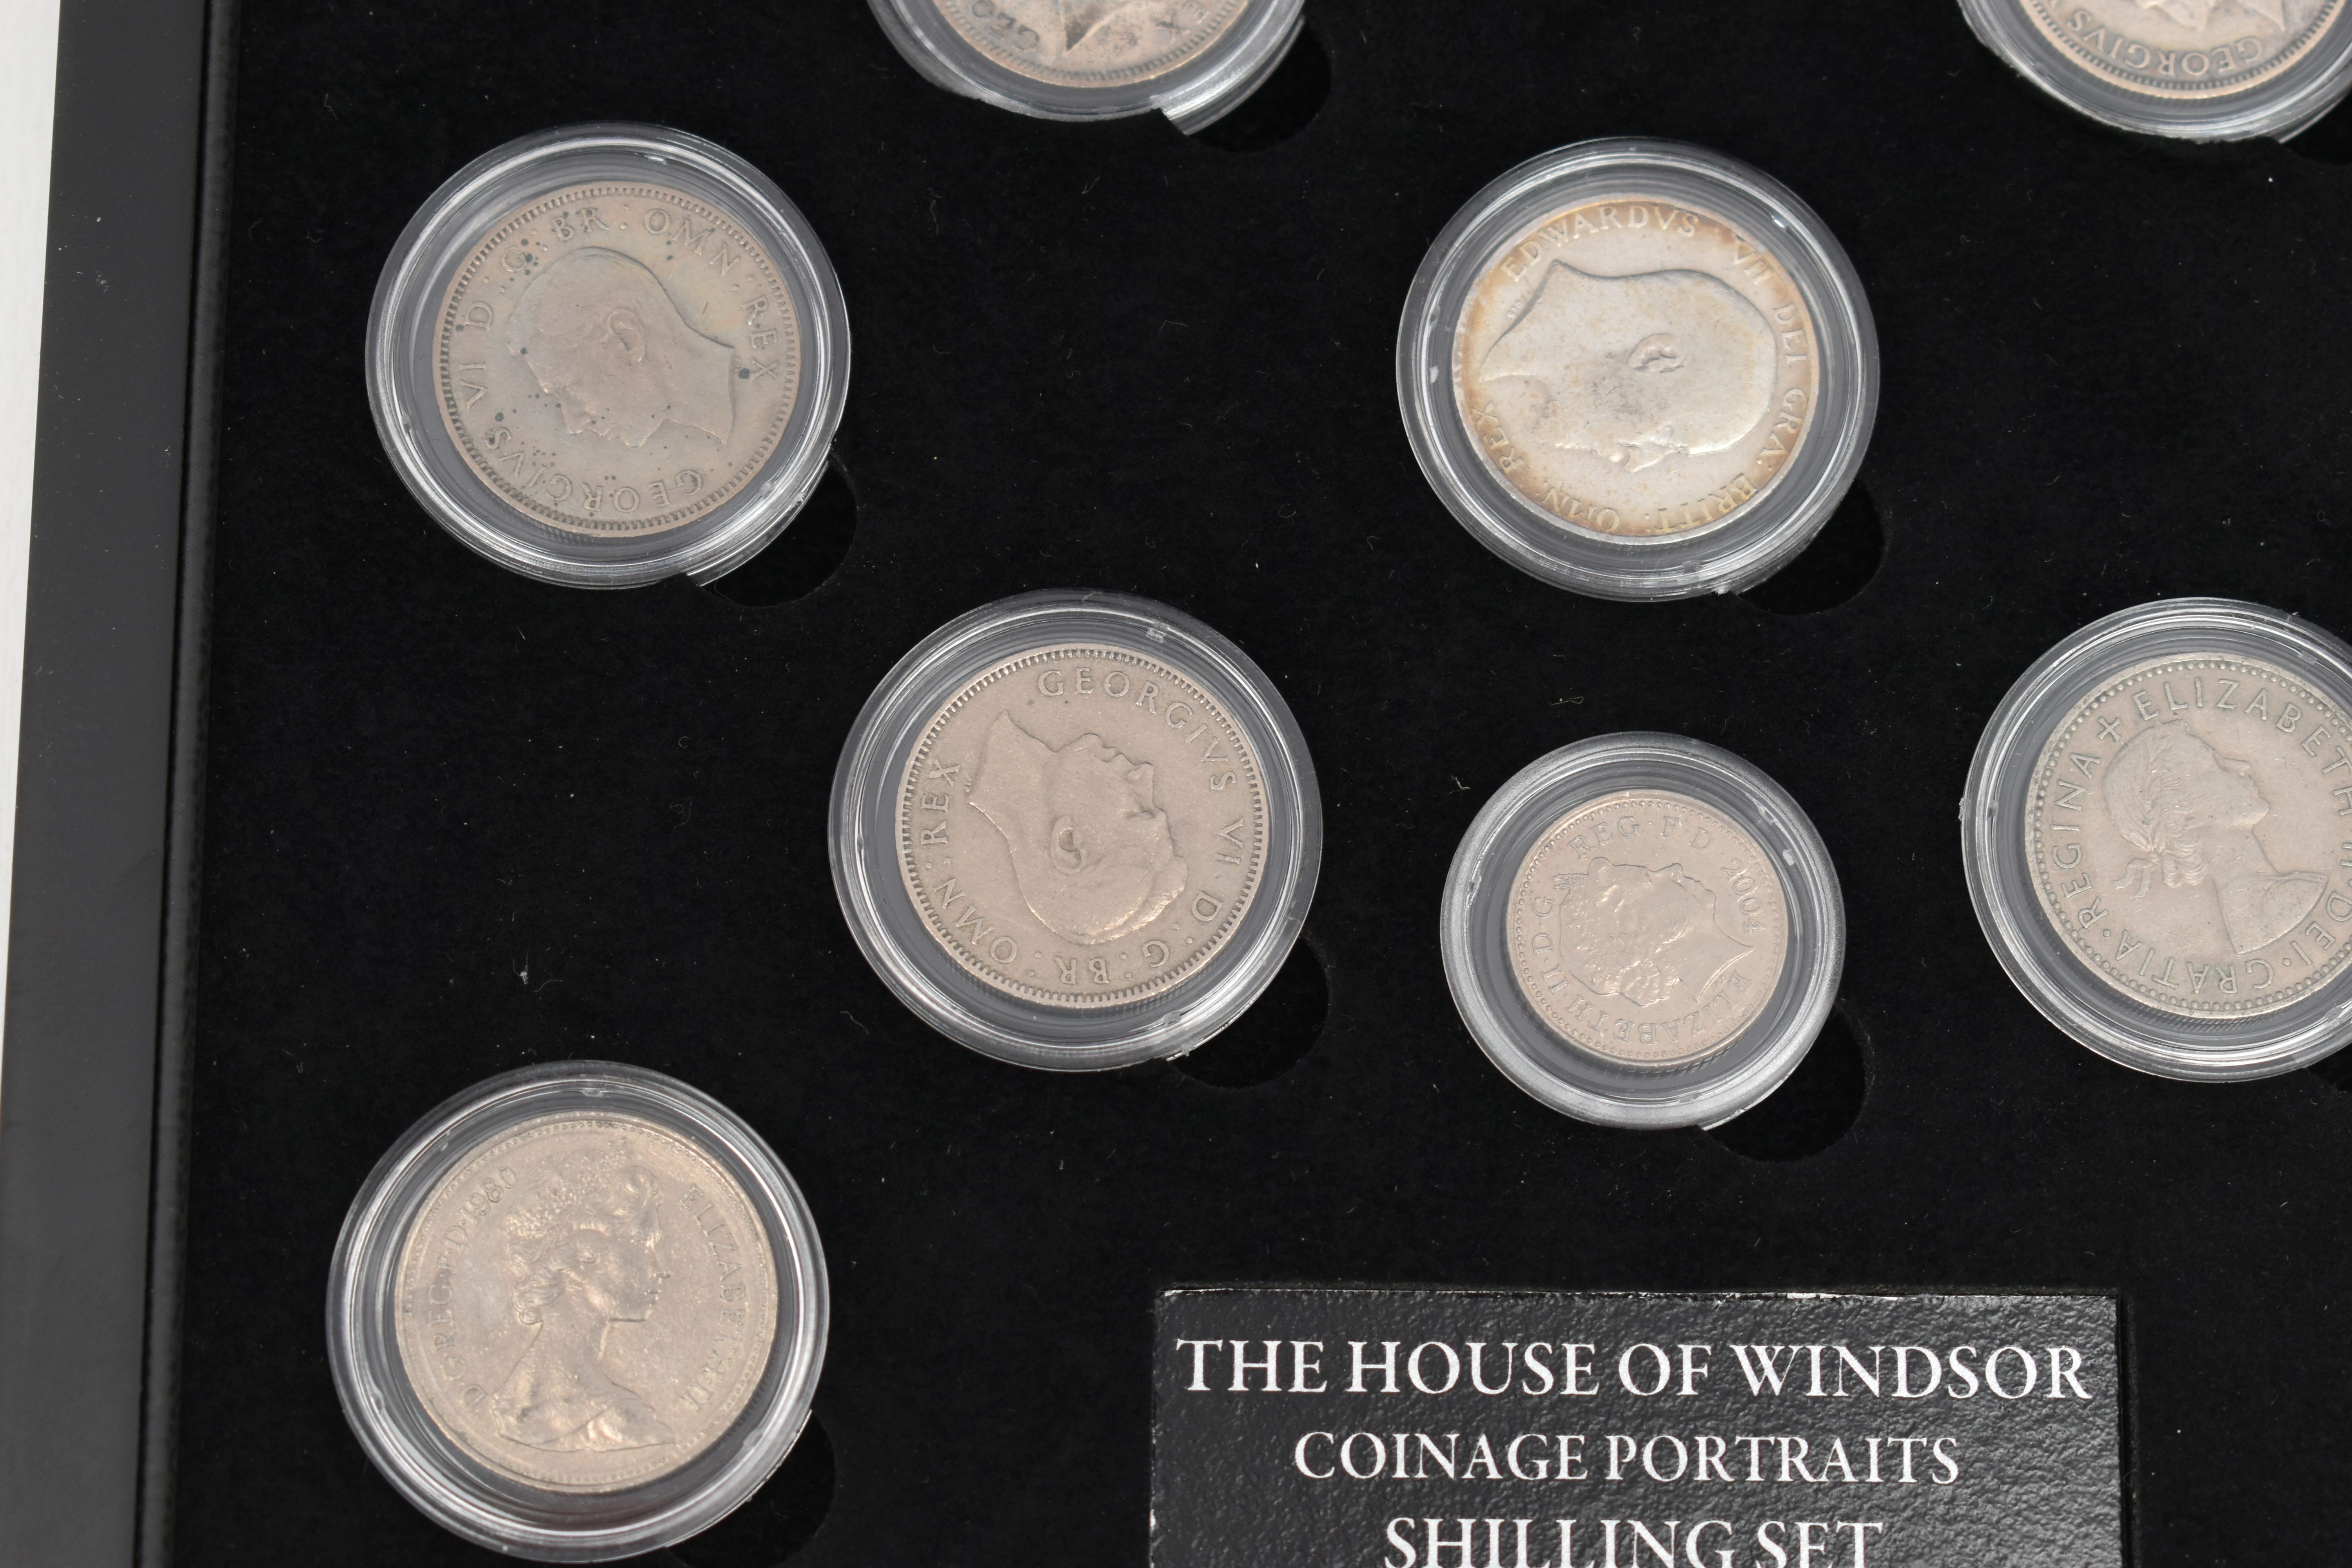 A CASED SET OF COMMEMORATIVE COINS, The House of Windsor coinage portraits shilling set by The - Image 5 of 6